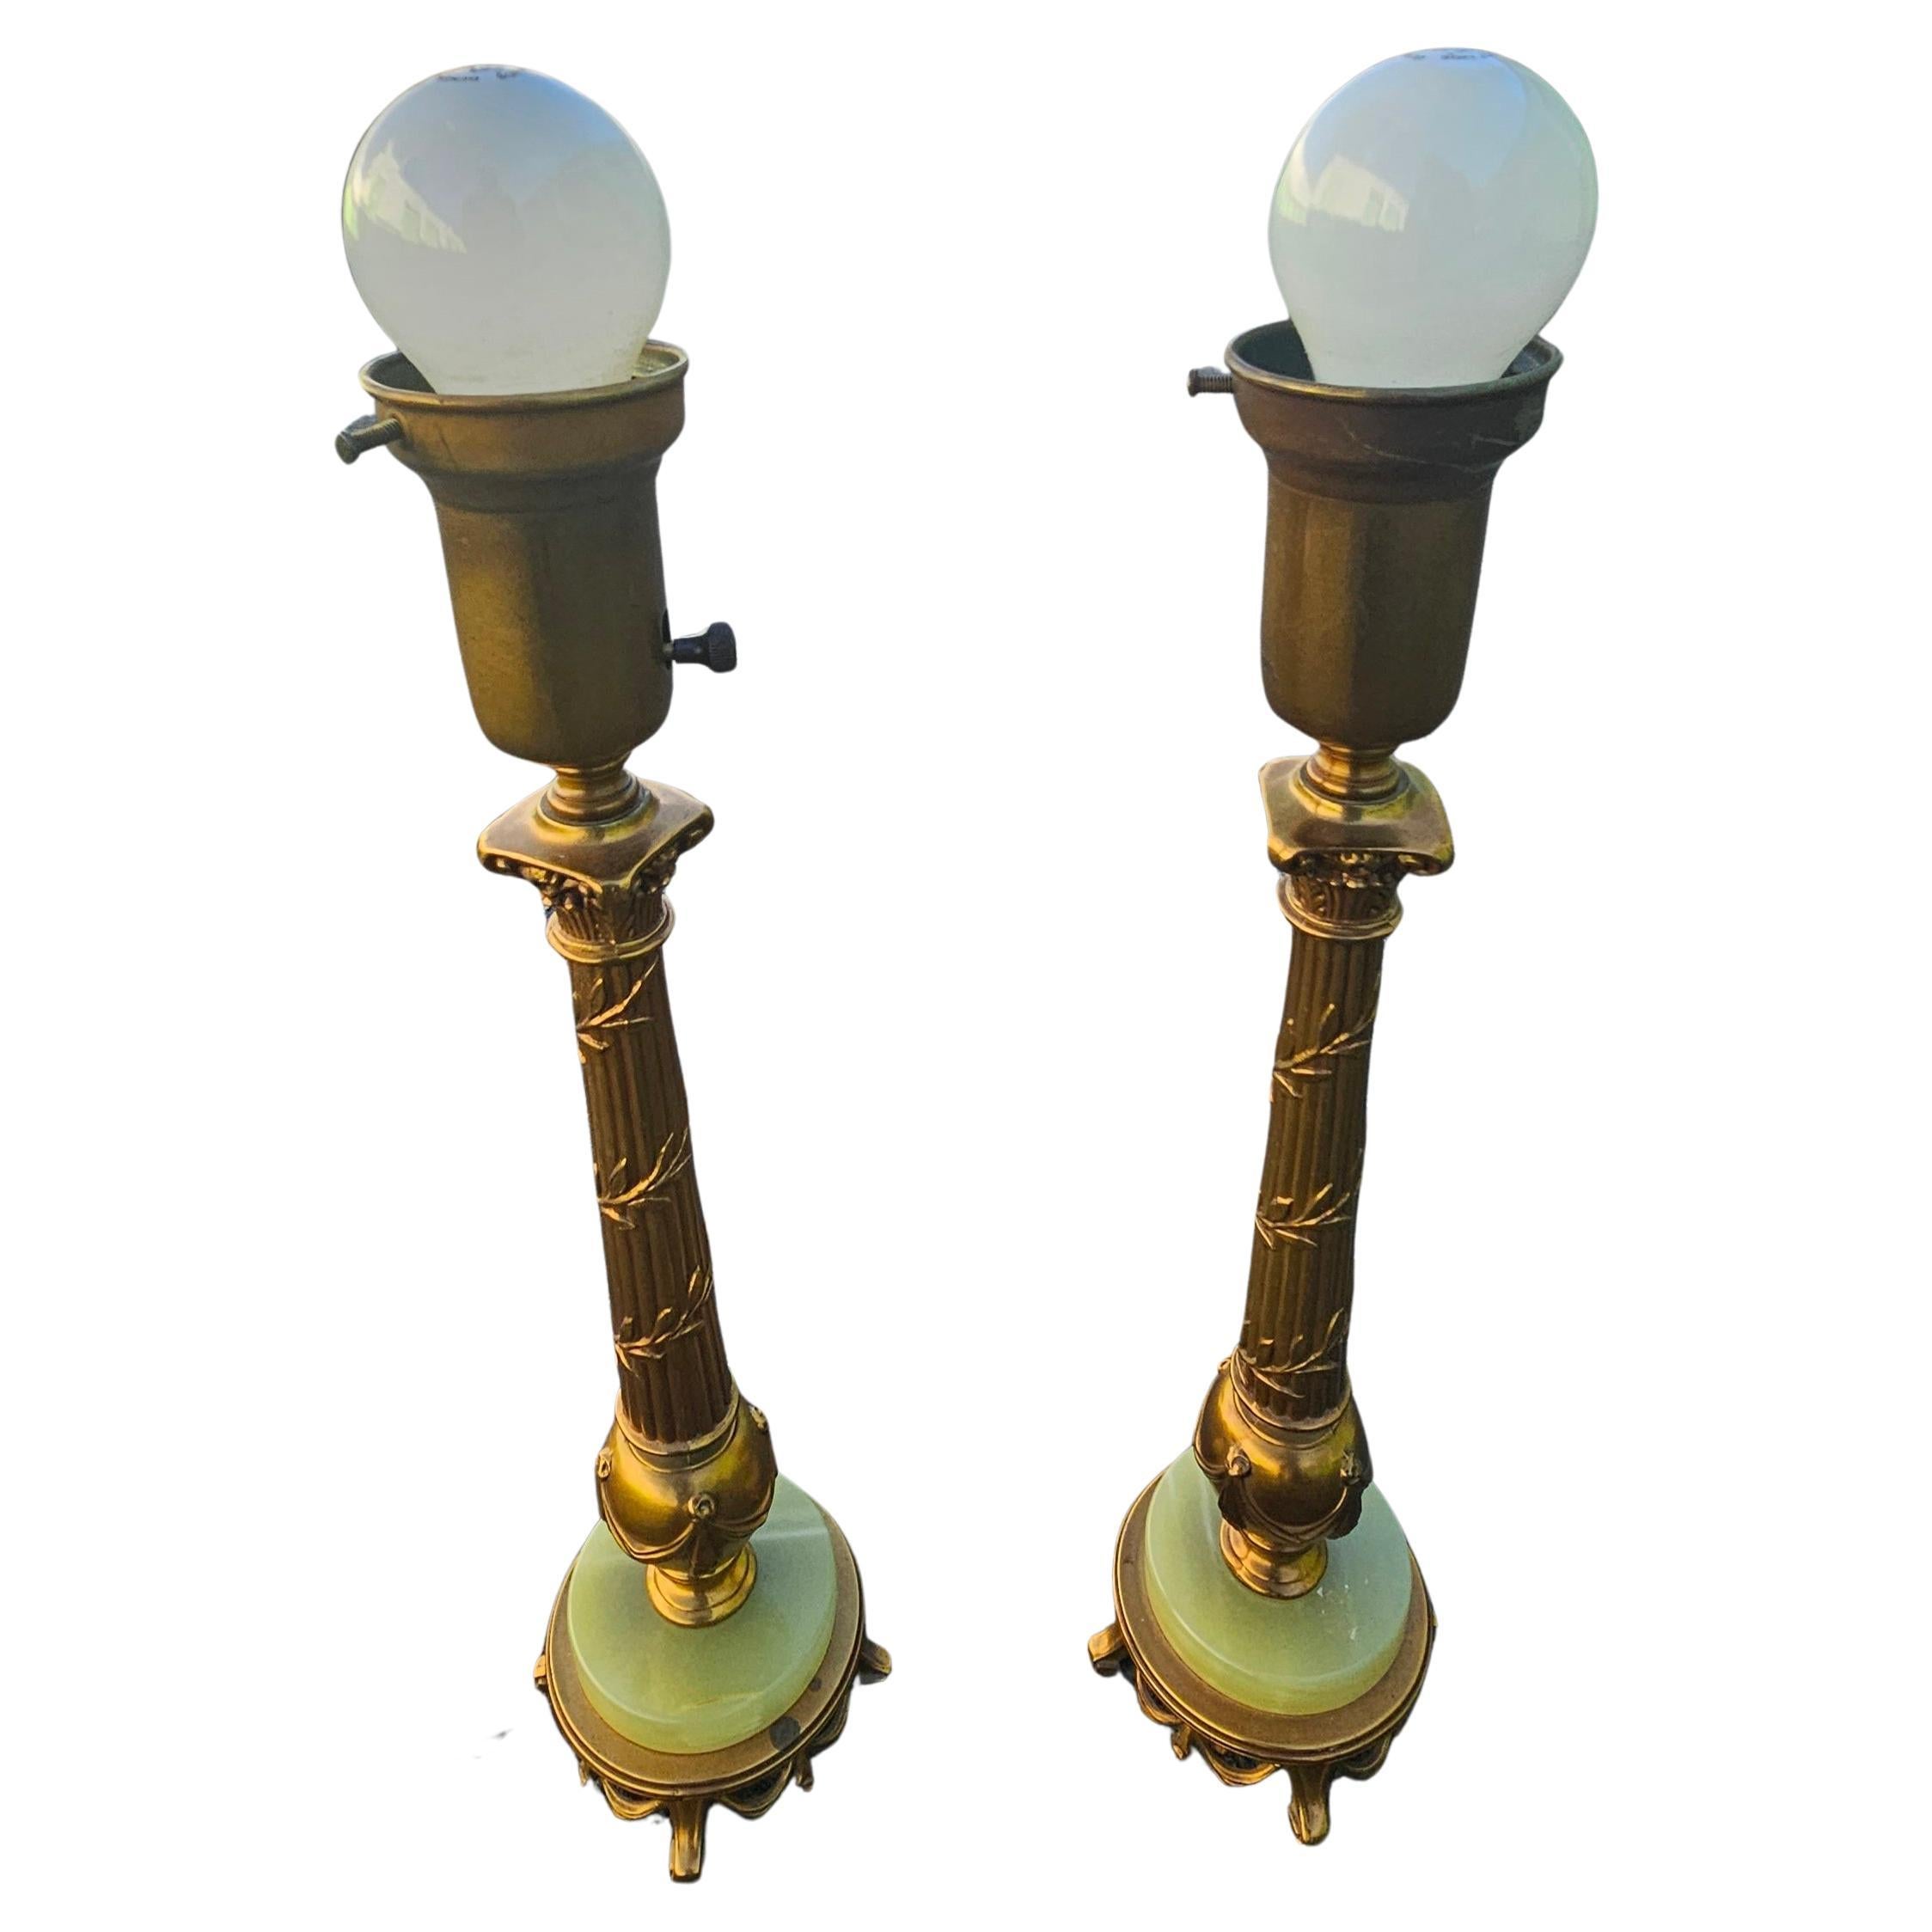 A Pair Mid-Century Rembrandt Onyx and Gilt Metal Patinated Torchiere Table Lamps. Measures 6